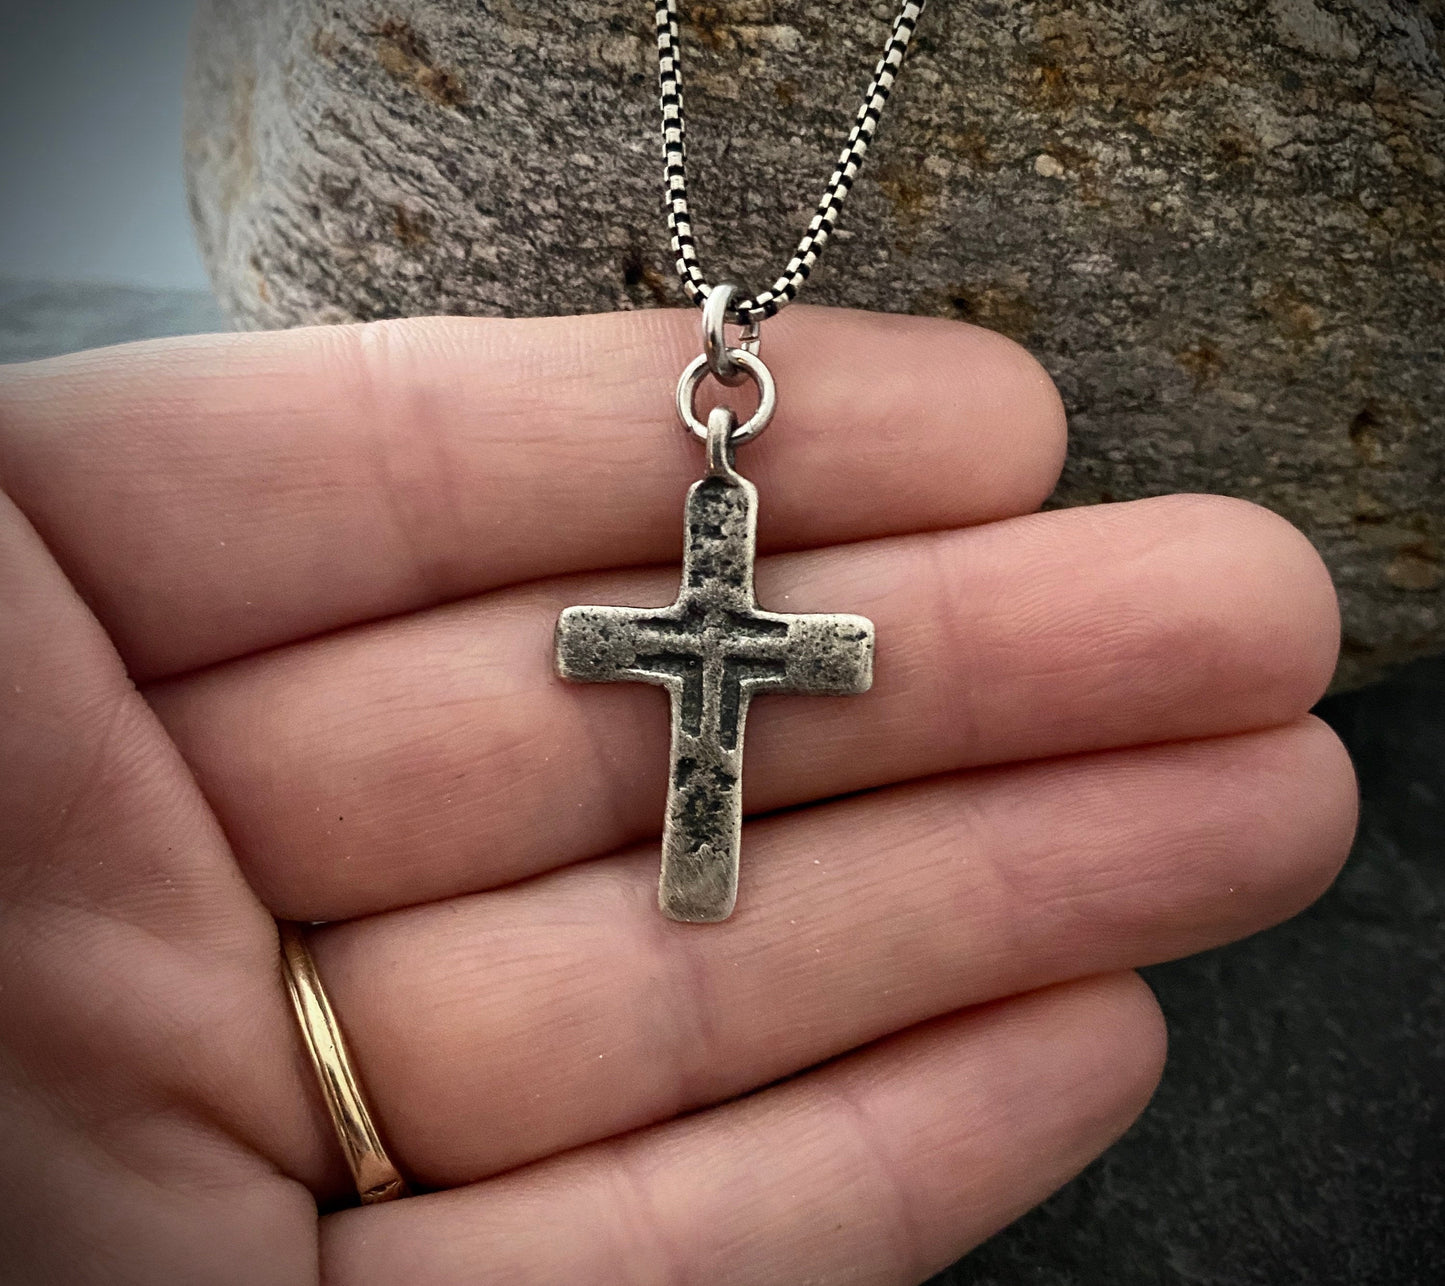 Sterling Silver Men's Cross Necklace, A Johnny LTD Original Piece with Cross made from Ancient Medieval Original, Unisex Jewelry, SS-002